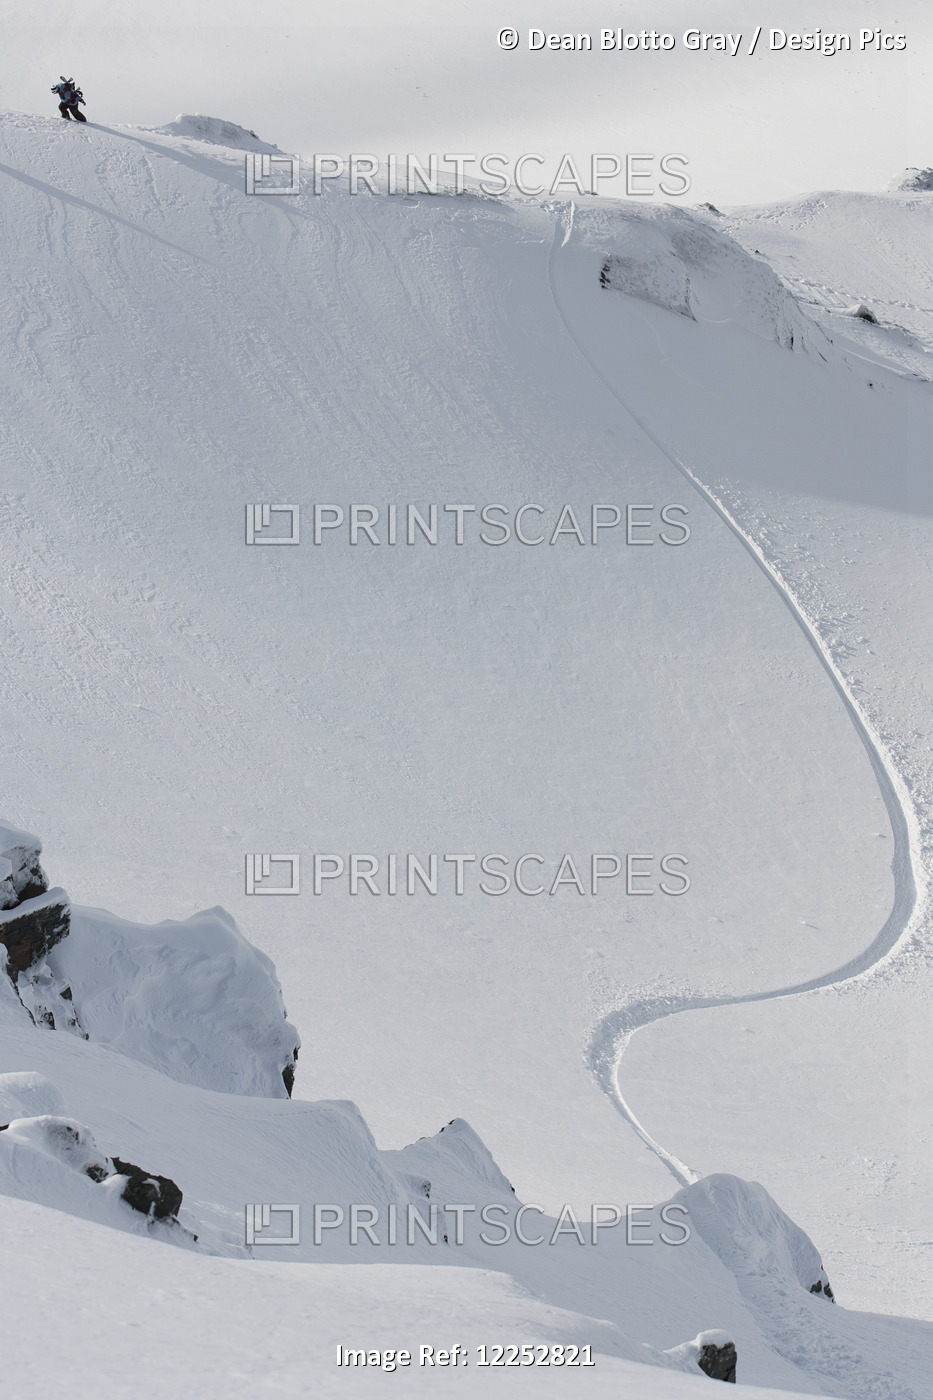 Professional Snowboarder, Cerro Castor, Climbing A Ridge In The Mountains Of ...